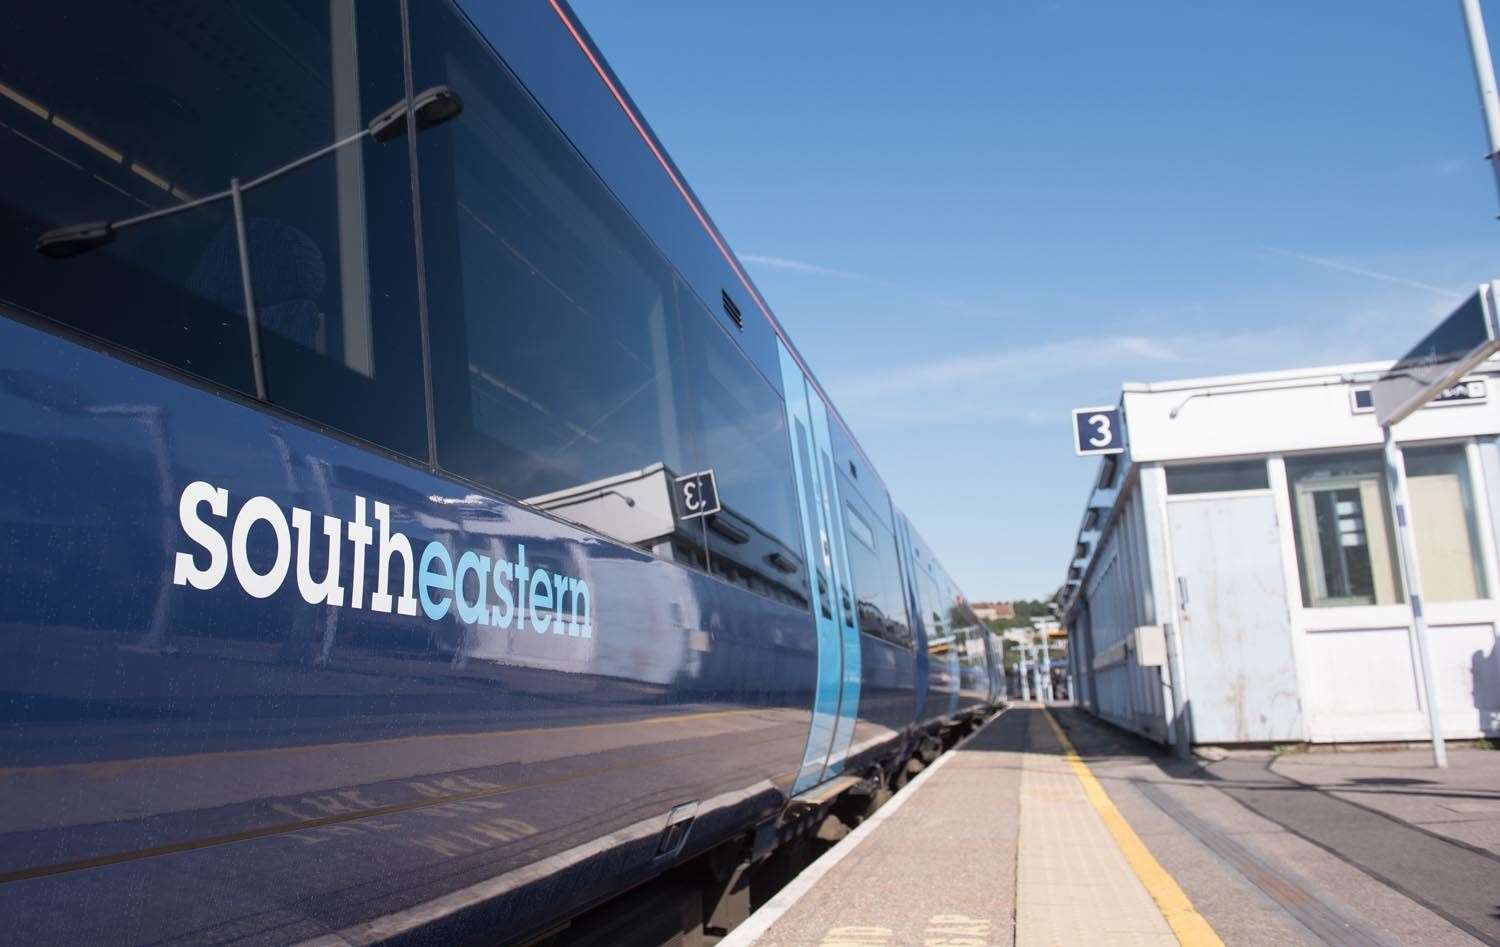 Southeastern has operated the bulk of Kent's rail services since 2006